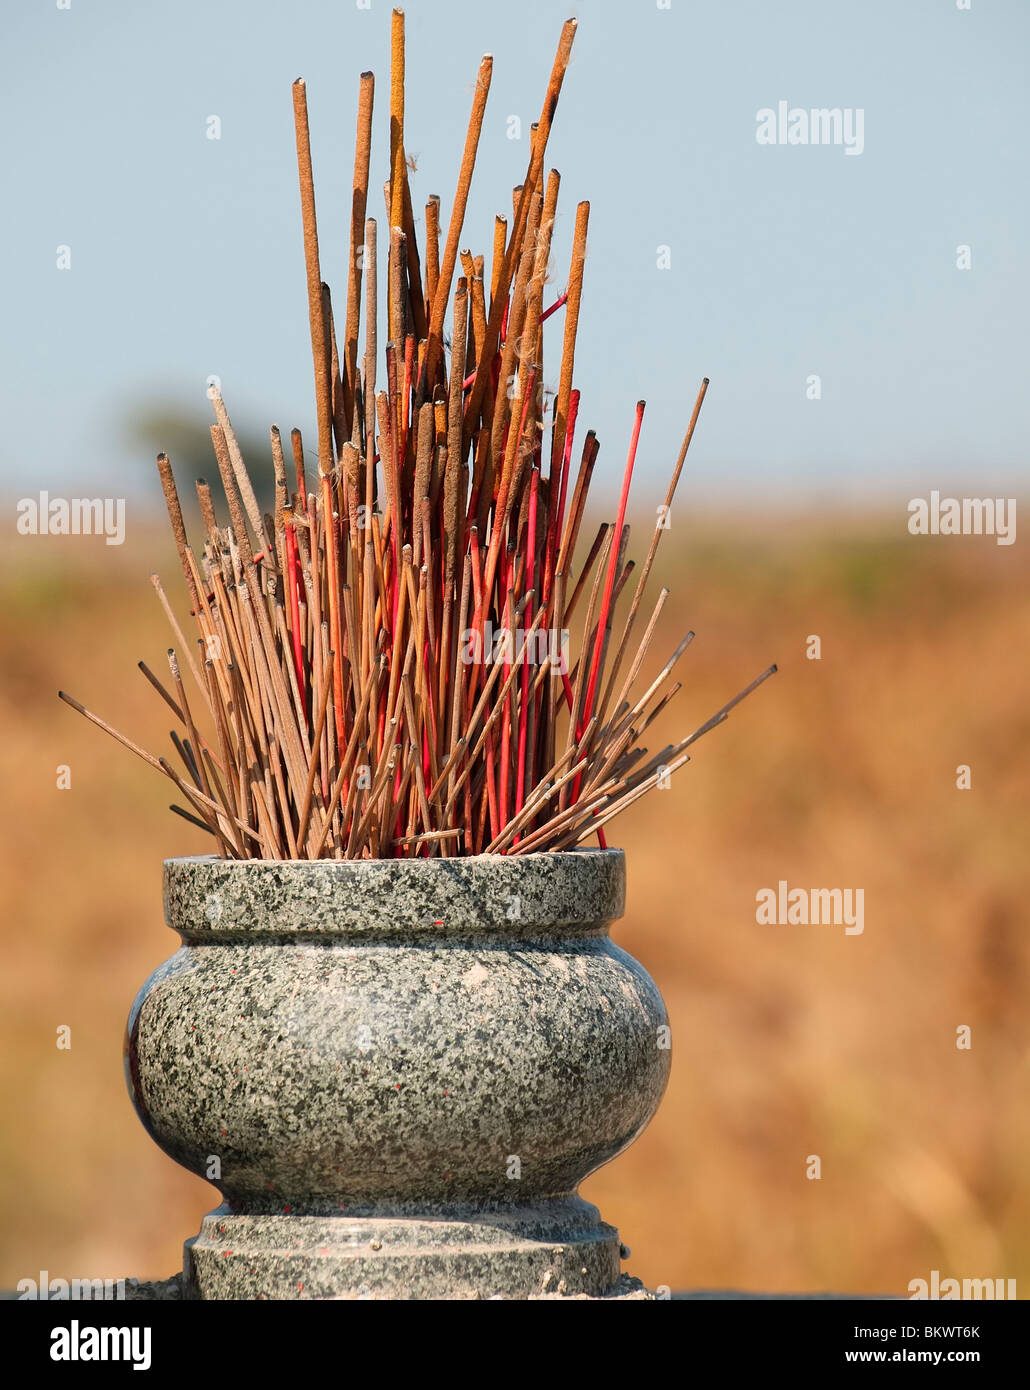 Incense holder made from granite stone with half burned incense sticks  Stock Photo - Alamy